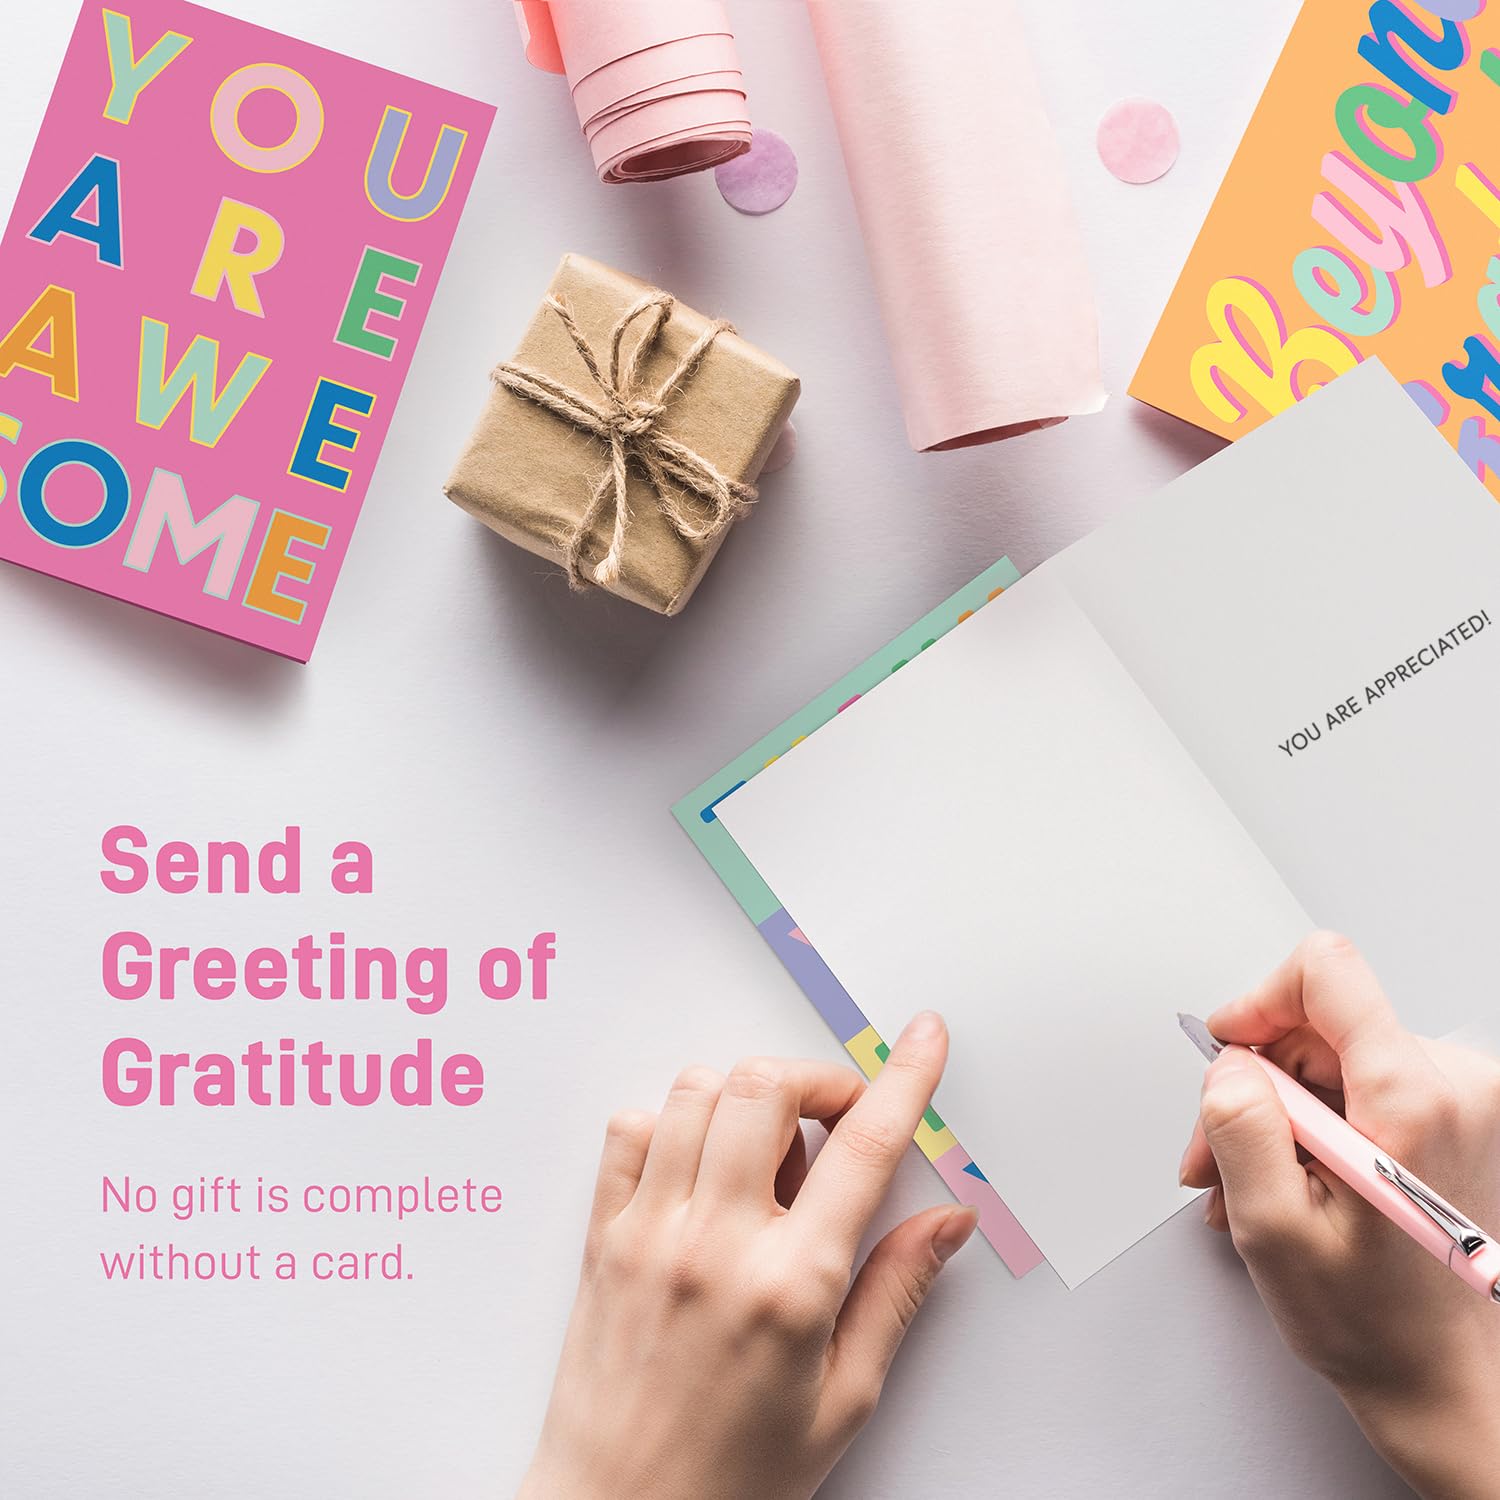 S&O Fun Thank You Cards with Envelopes - Assorted Thank You Cards to Express Gratitude - Thank You Notes with Envelopes Set of 24 - Gratitude Note Cards with Envelopes in Pop Colors to Mix & Match